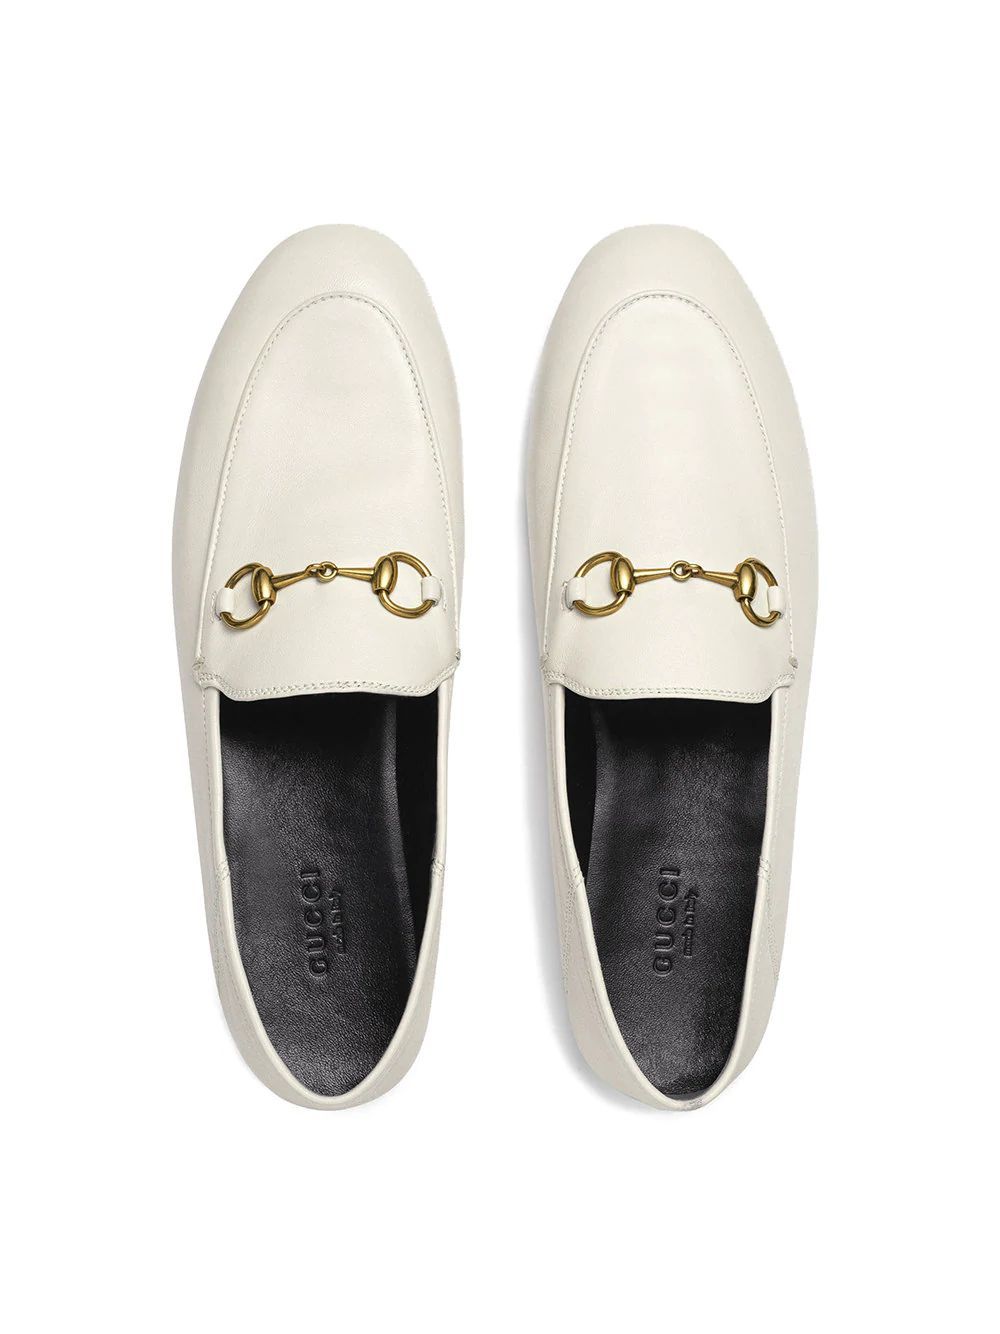 LOAFERS GUCCI, LEATHER 100%, color WHITE, Leather sole, SS21, product code 414998DLC009022